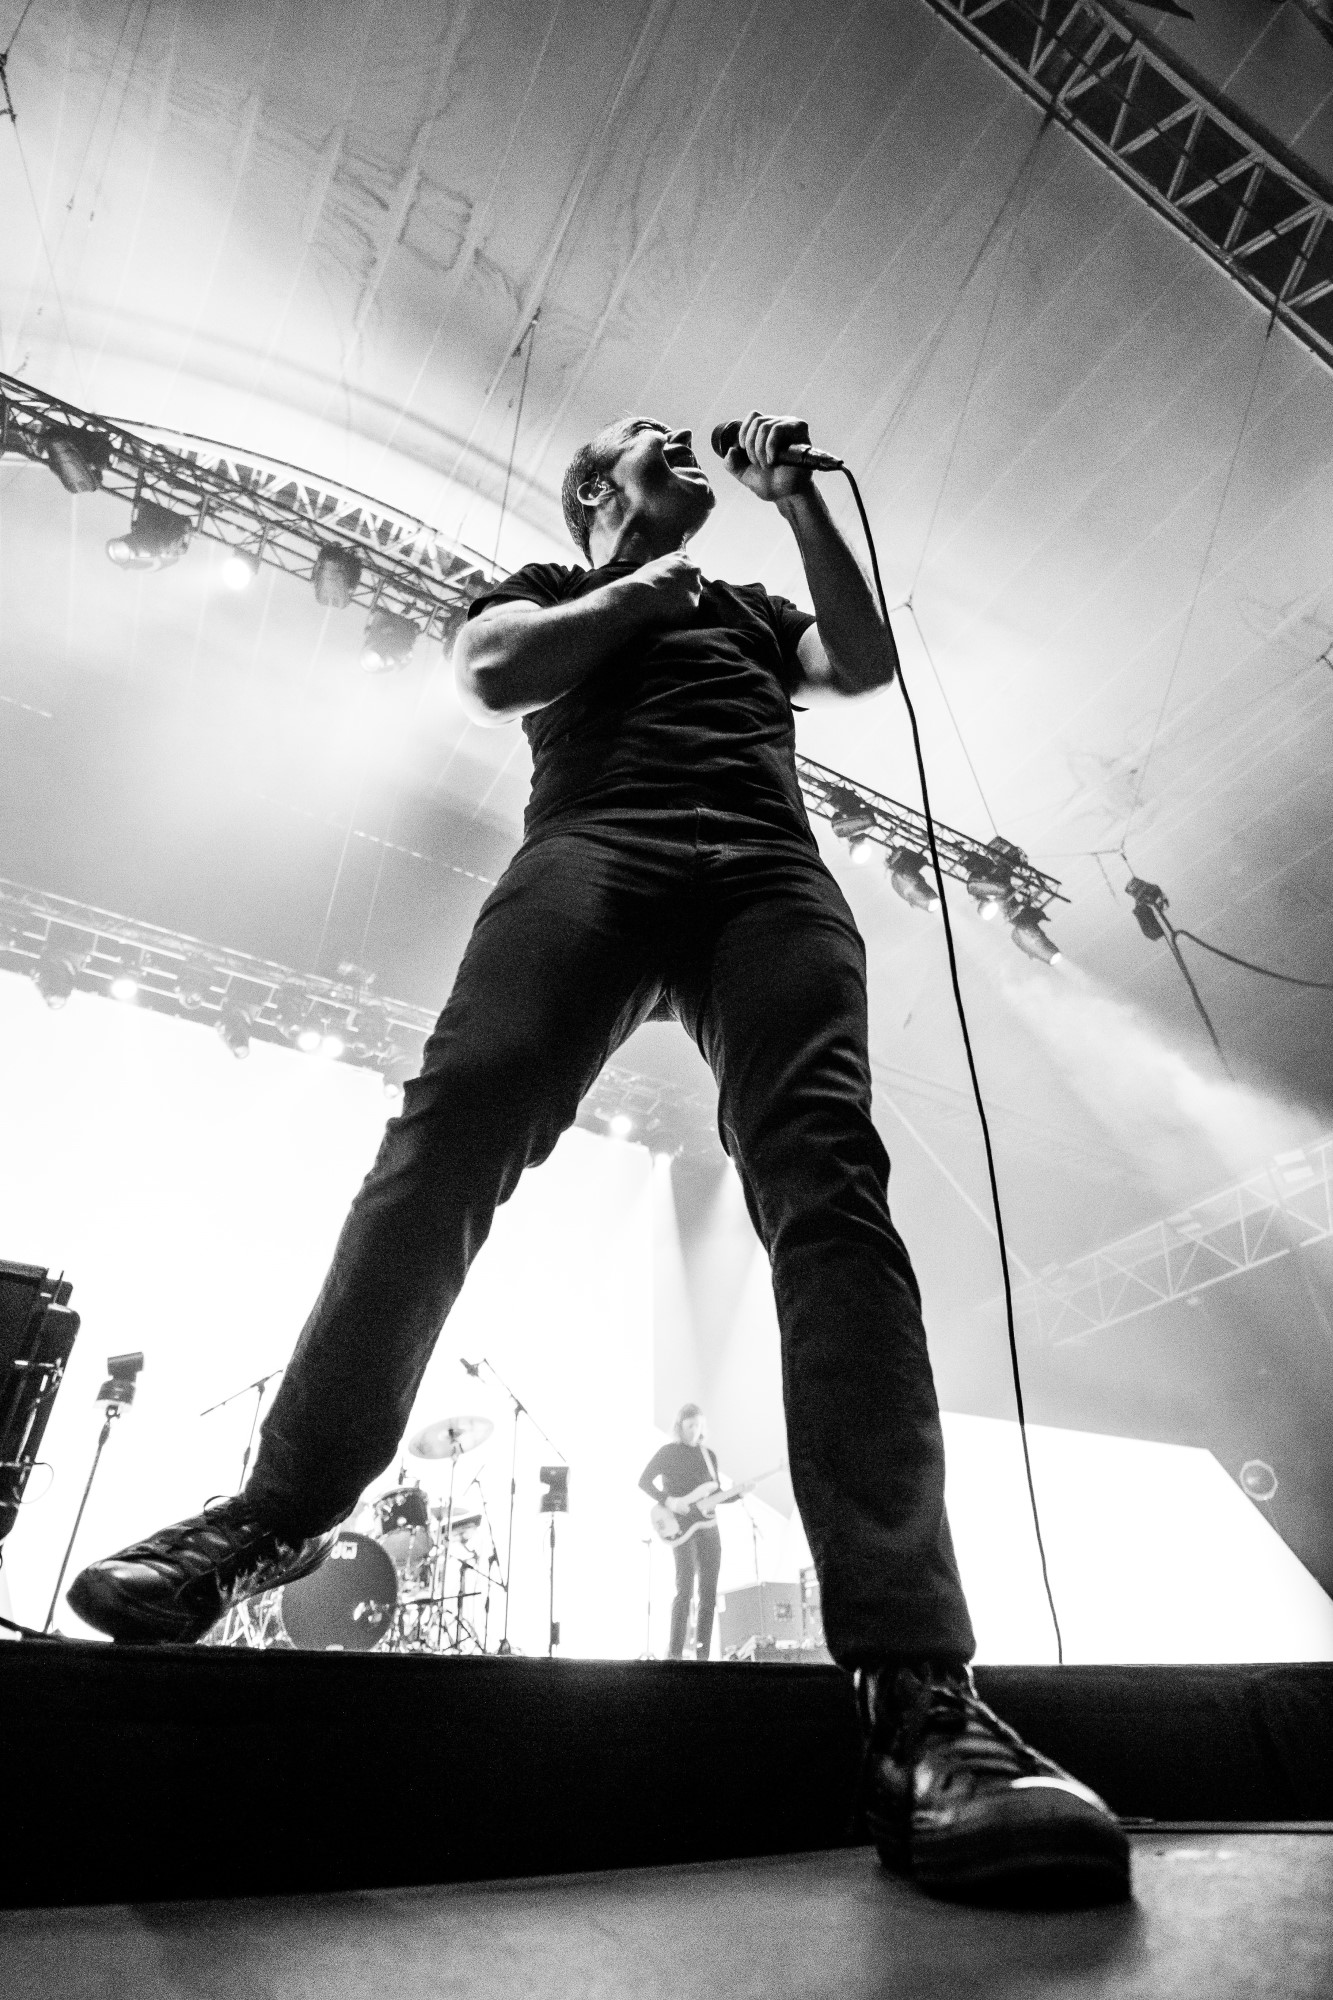 Seasons Change: Future Islands at Alexandra Palace - pictures, setlist ...